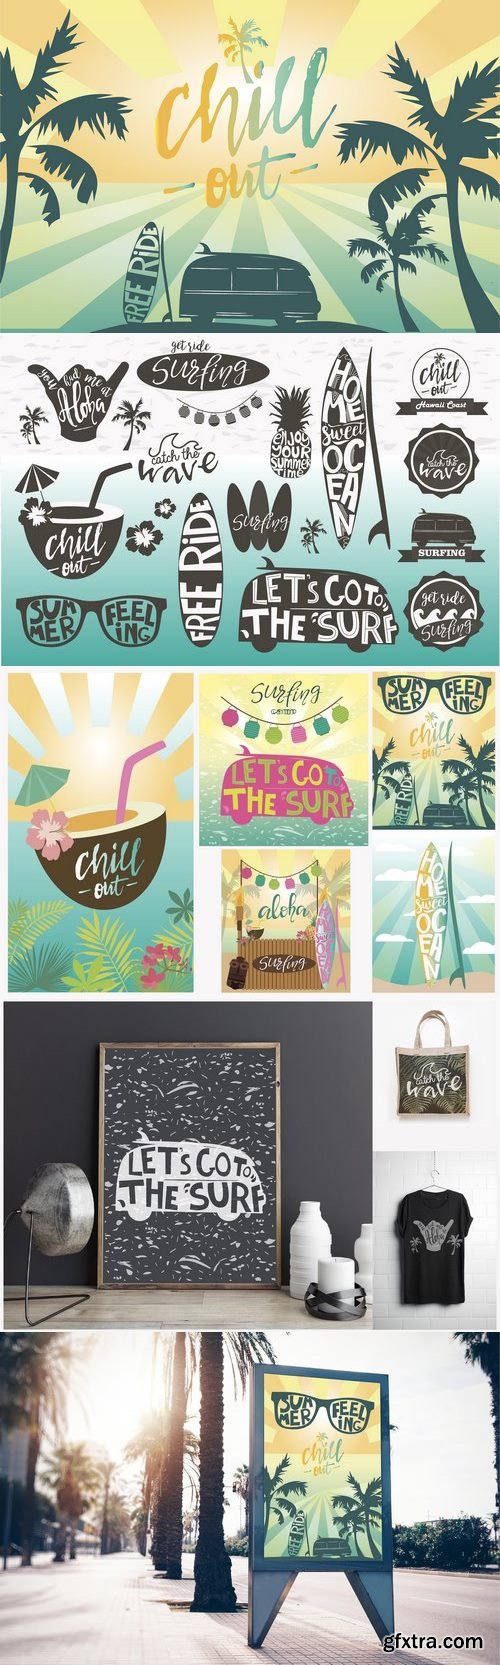 CM - 14 surfing logos templates 5 posters 1366589